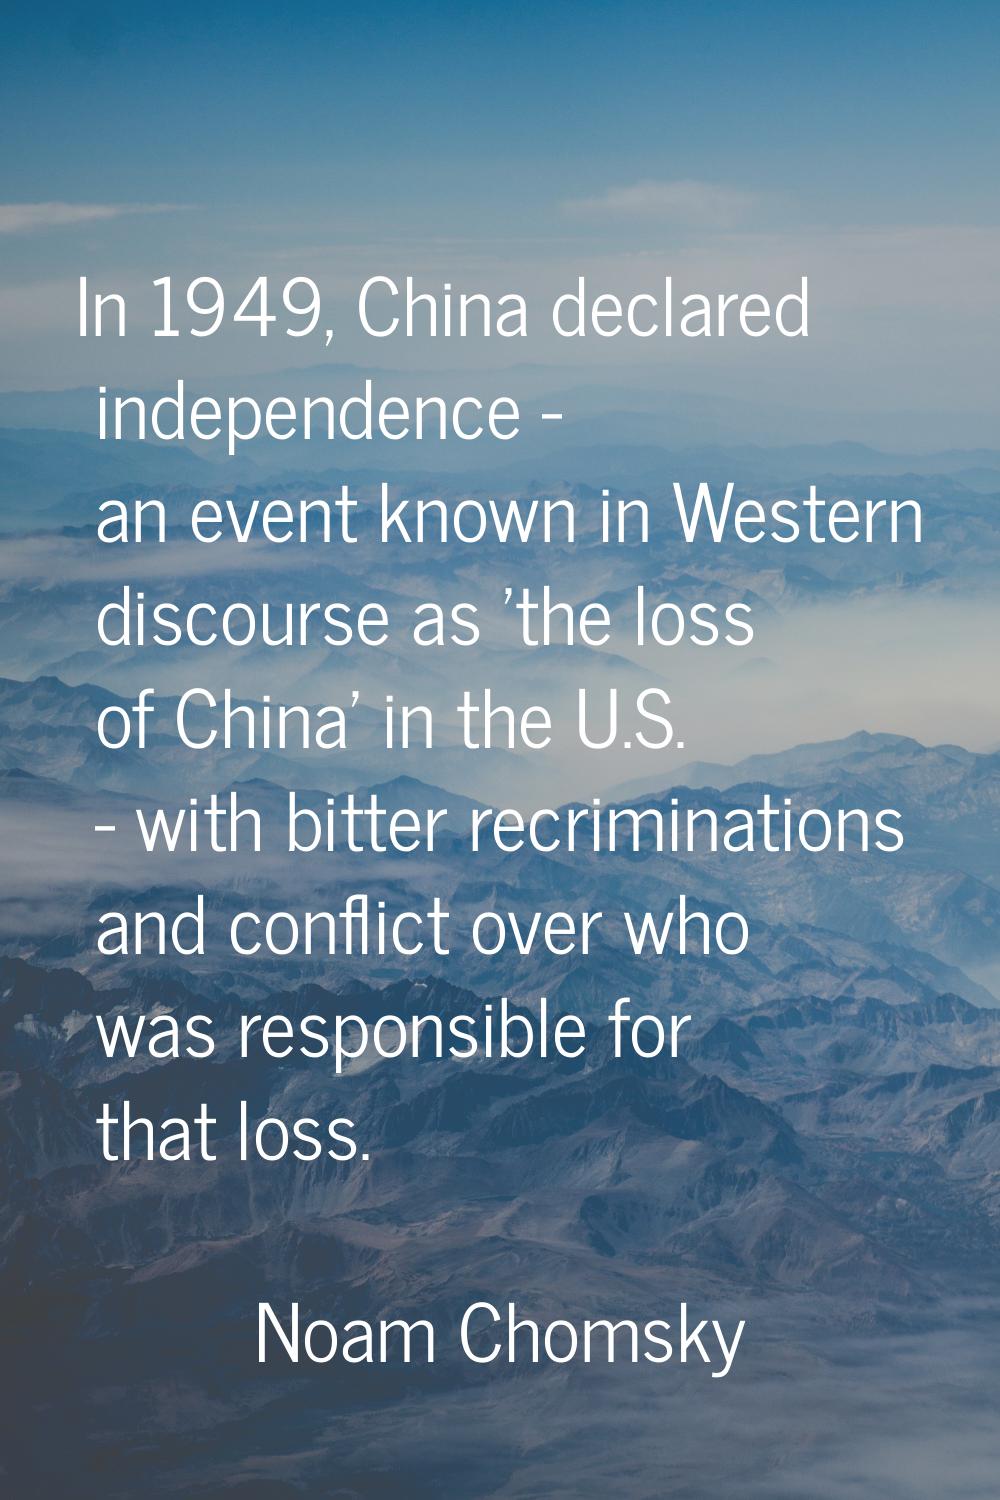 In 1949, China declared independence - an event known in Western discourse as 'the loss of China' i